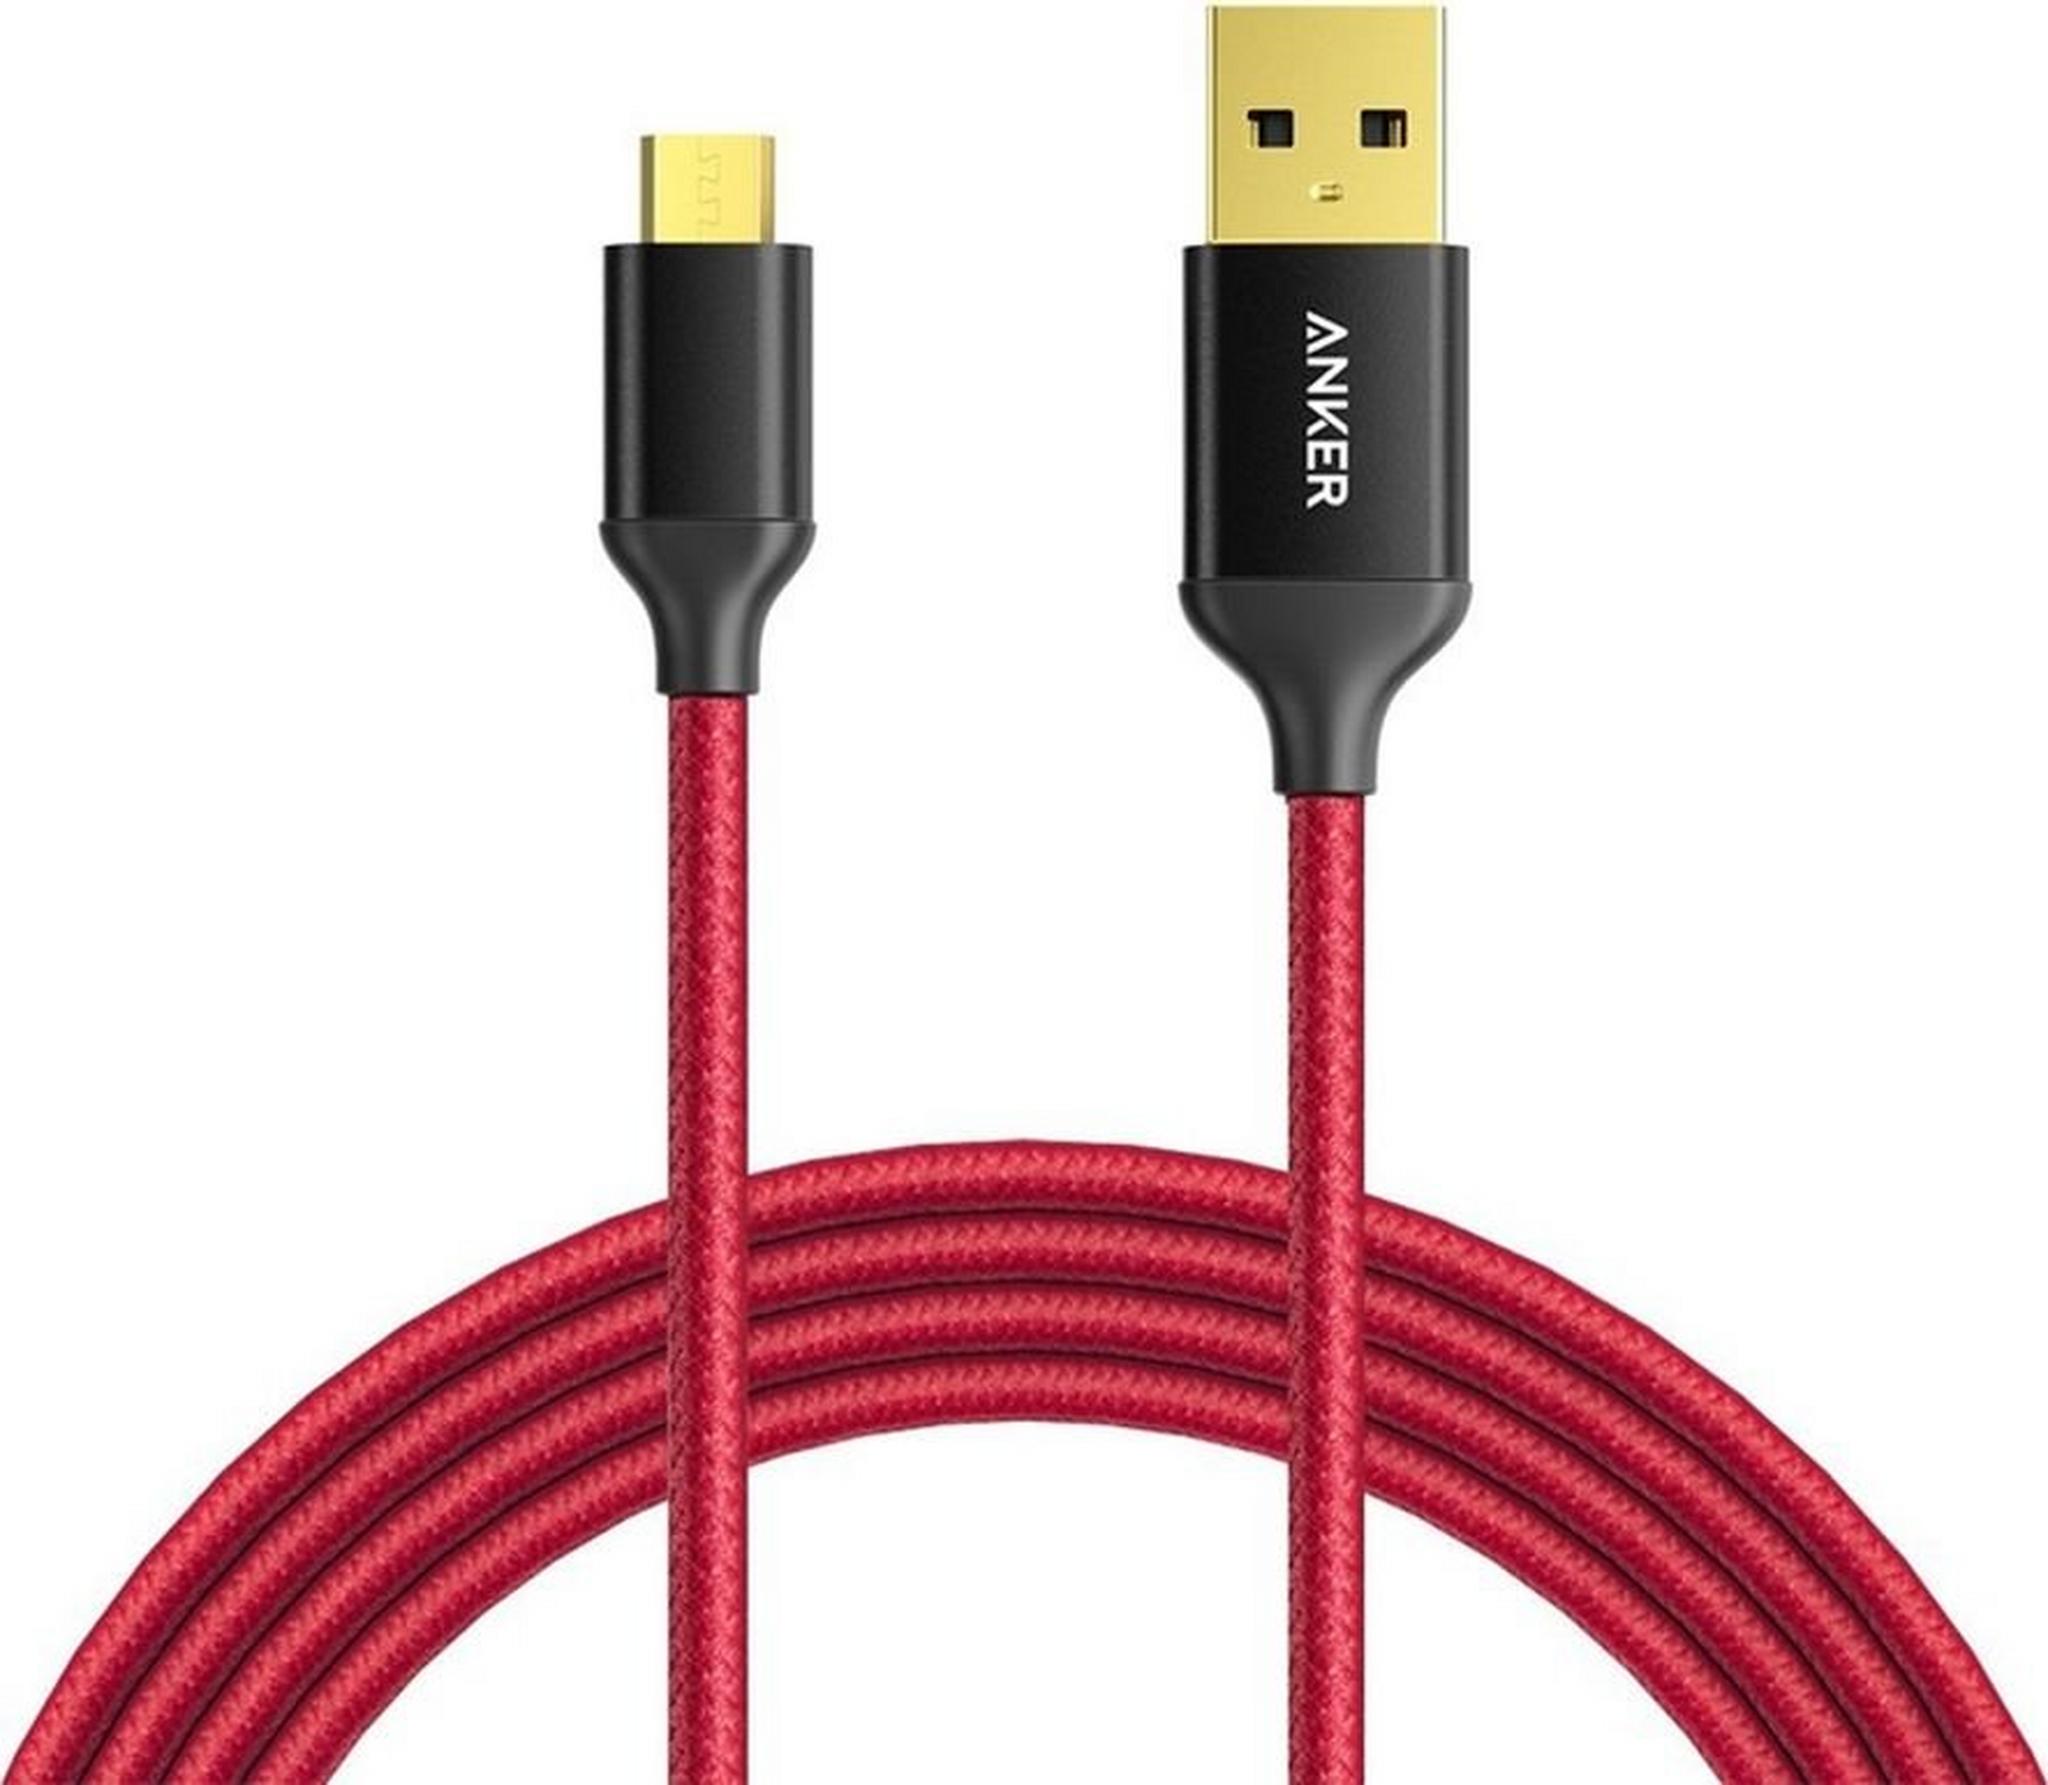 Anker PowerLine Micro USB Nylon Braided Cable 1.8M - Red